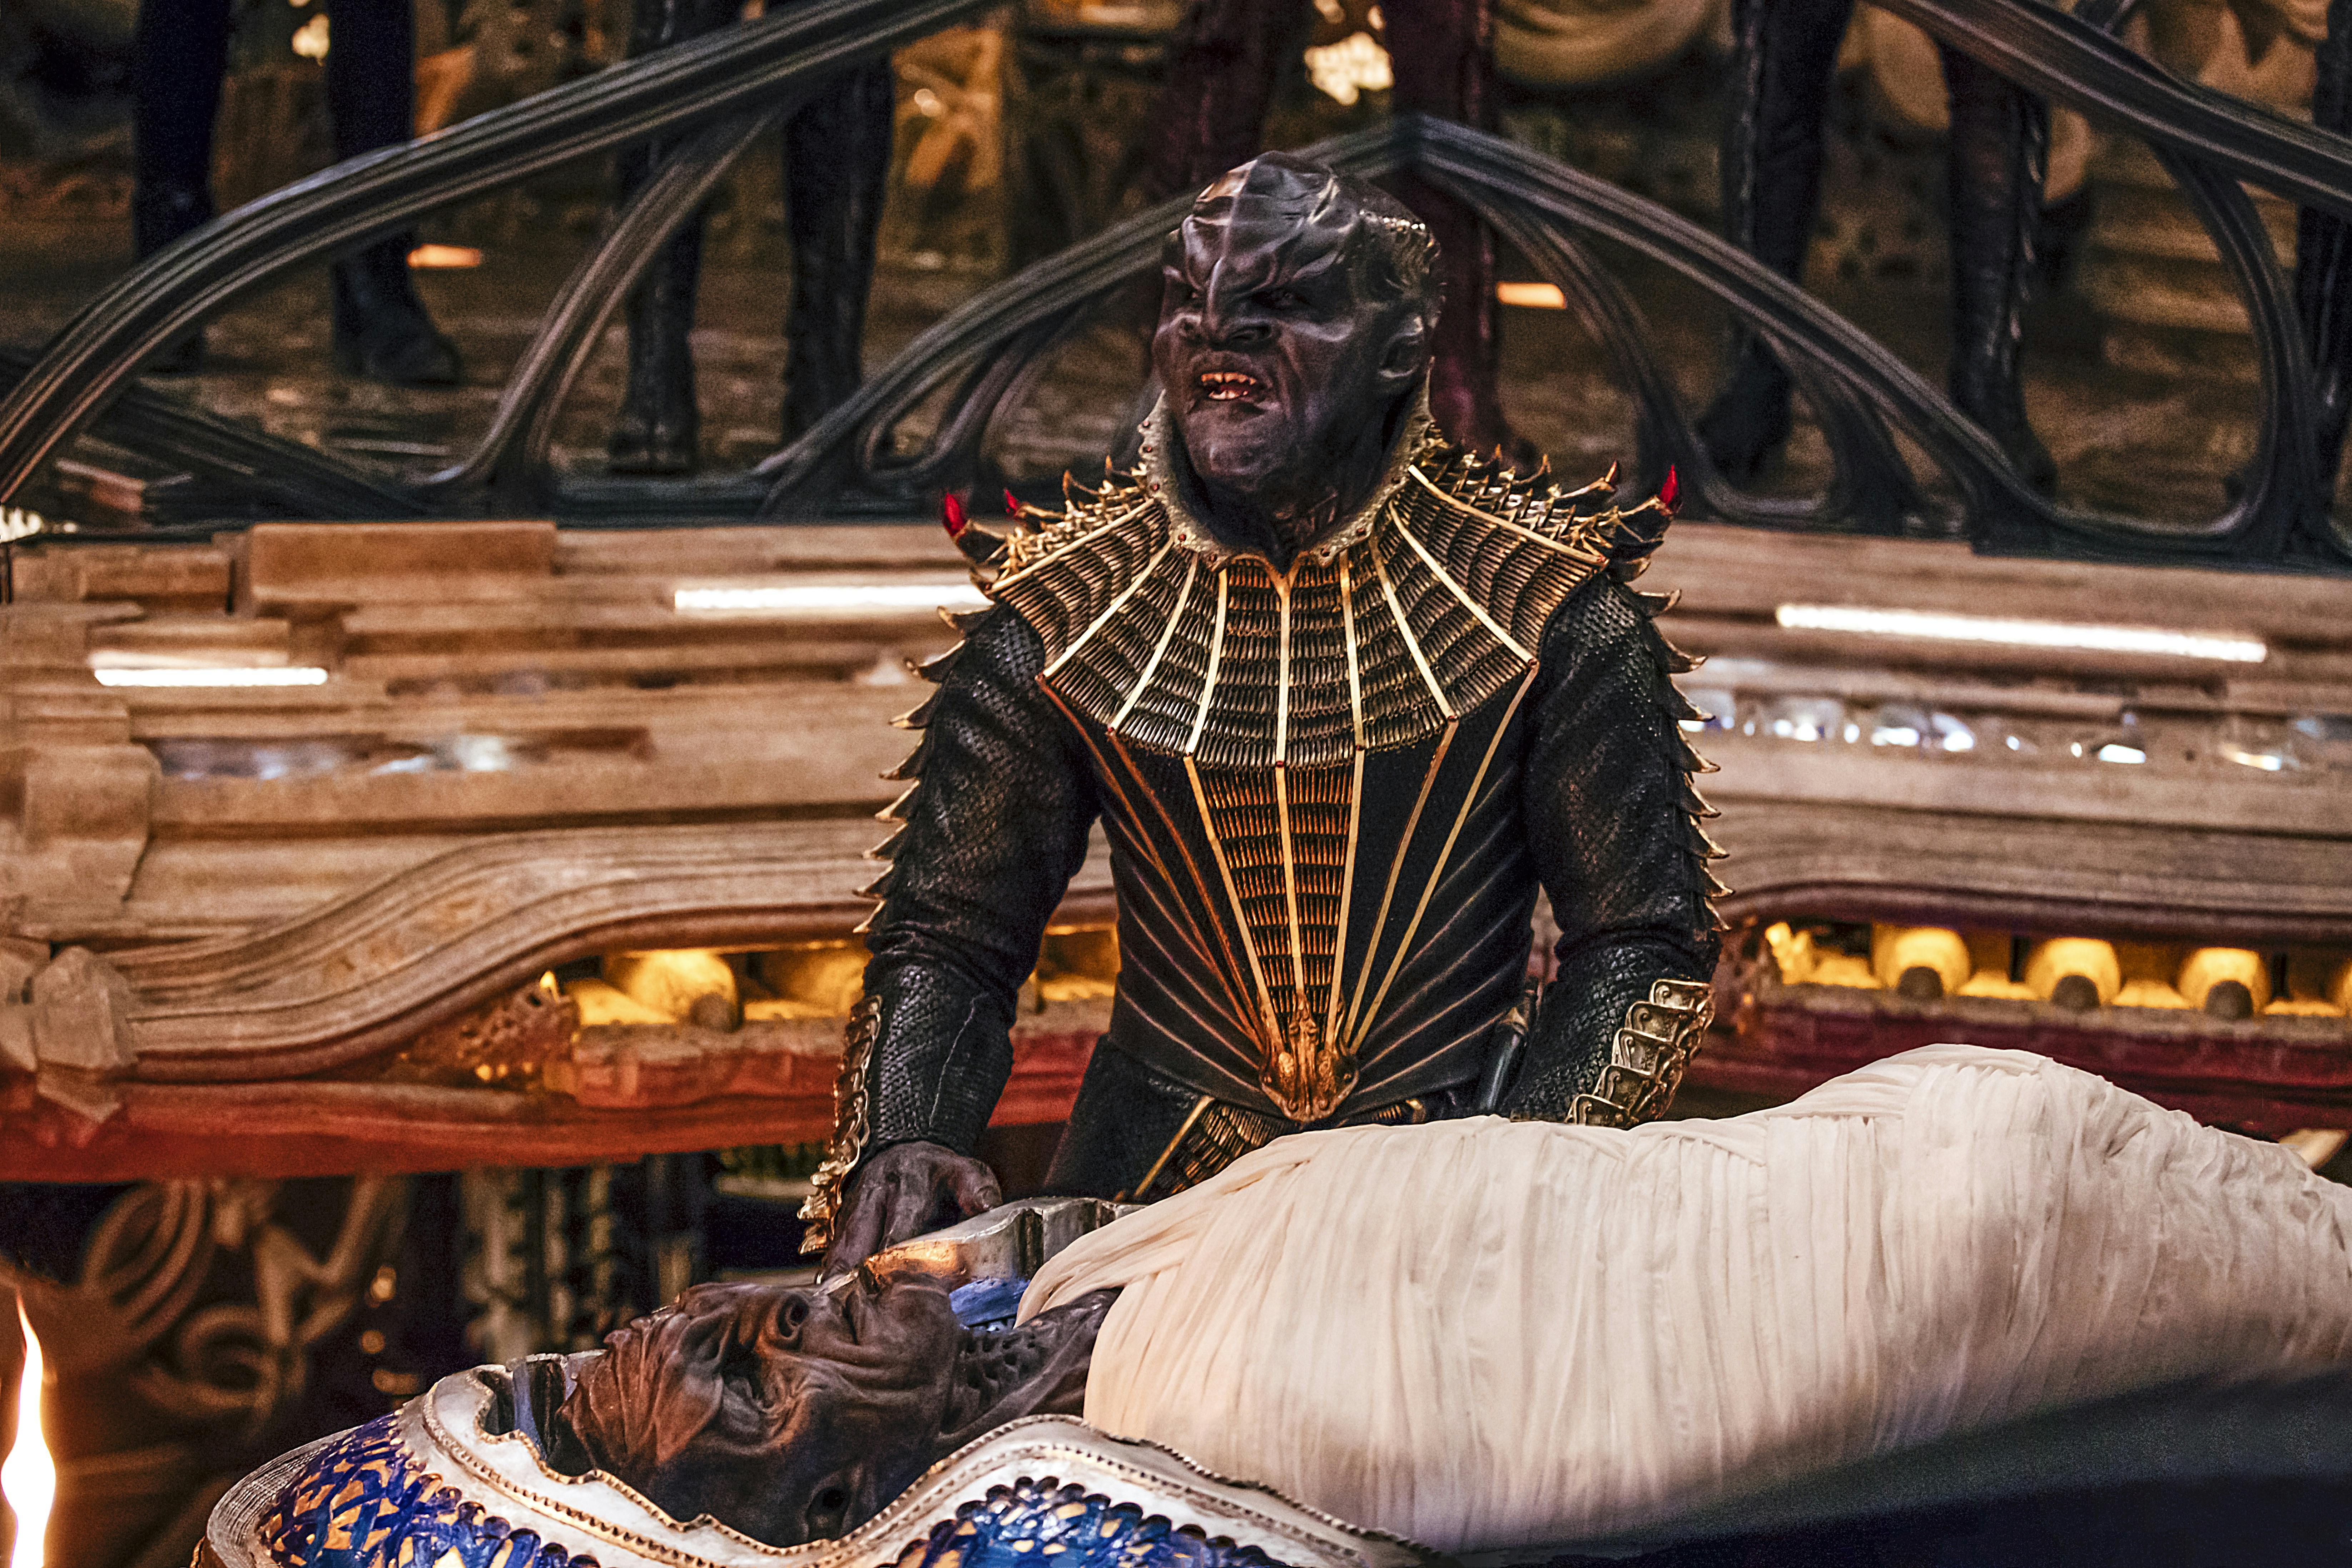 T'Kuvma stands over Rejac the torchbearer's body in a sarcophagus aboard the Klingon vessel in 'The Vulcan Hello'